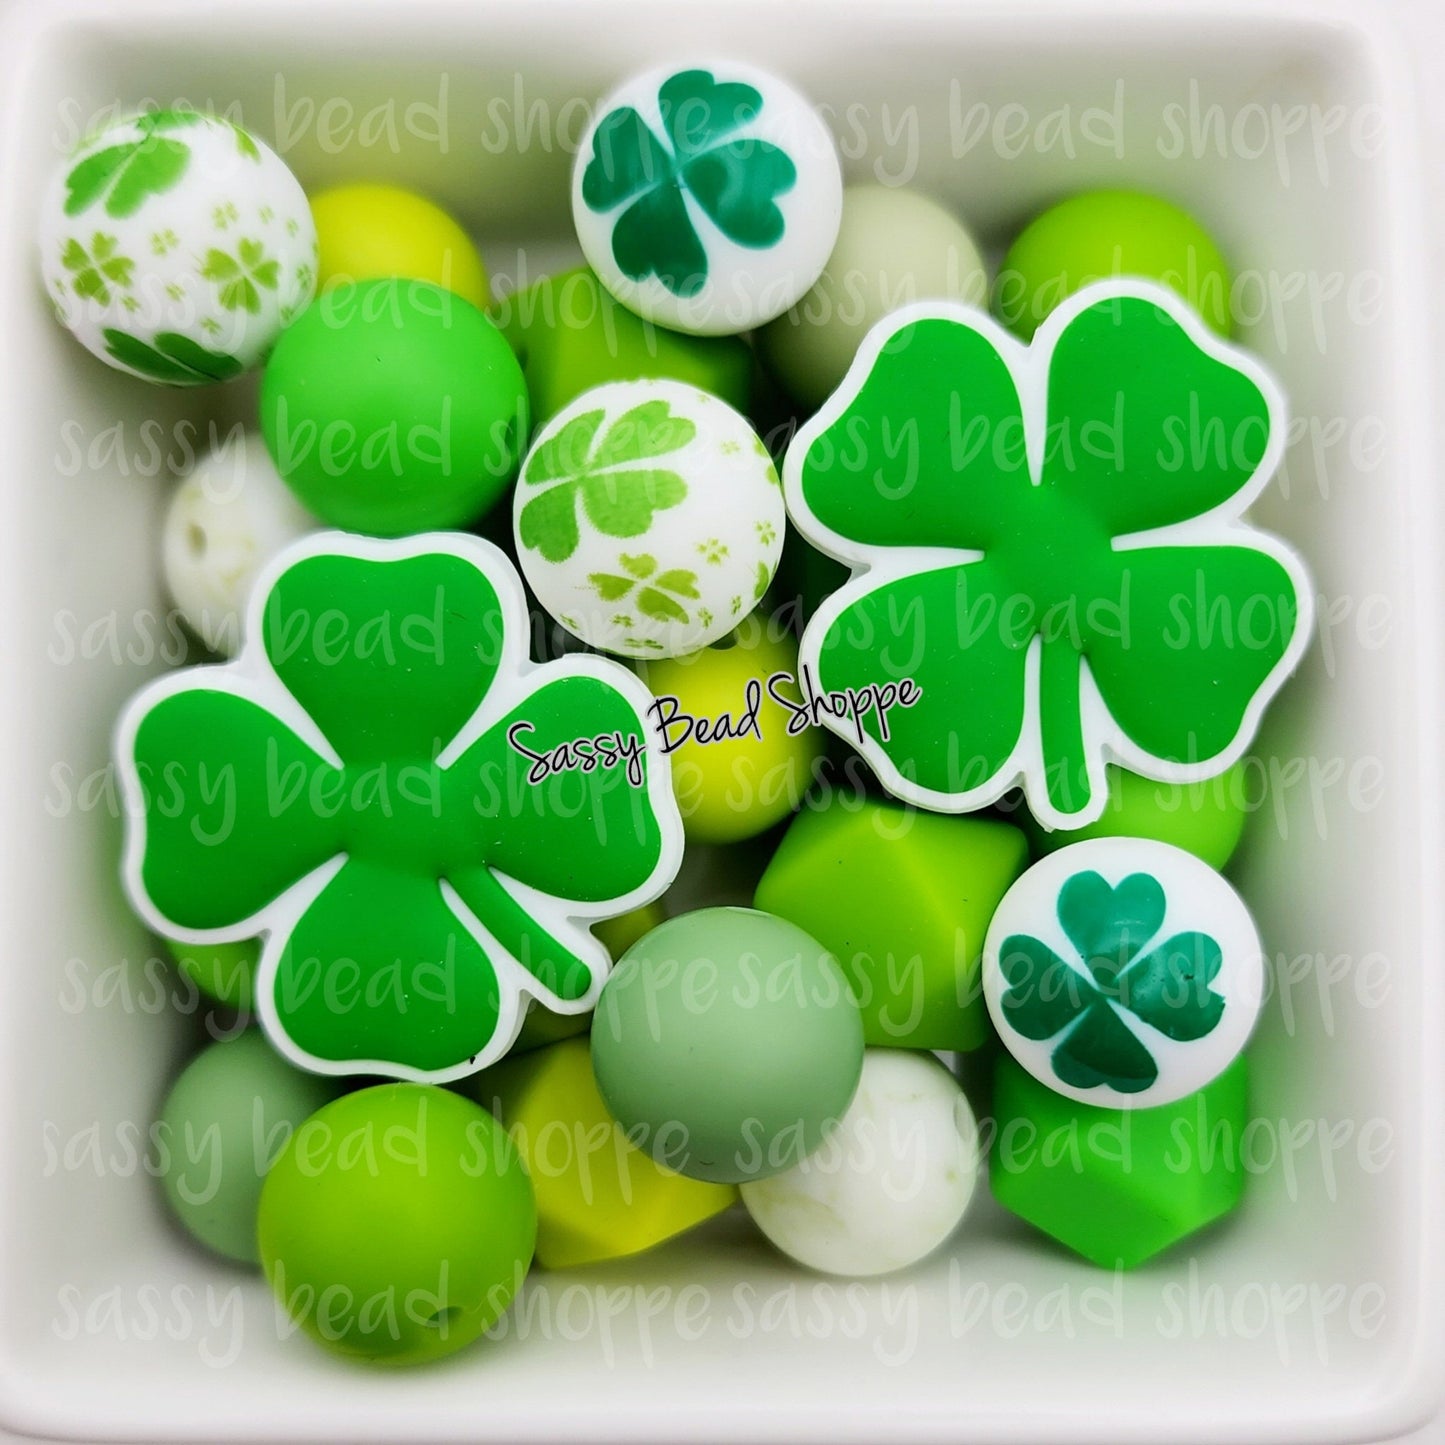 Lucky Vibes Silicone Bead Mix, Round, Set of 26, Bulk Mix of Silicone Beads, Beads for Pens, Silicone Beads, Wristlet, Keychain, Lanyard